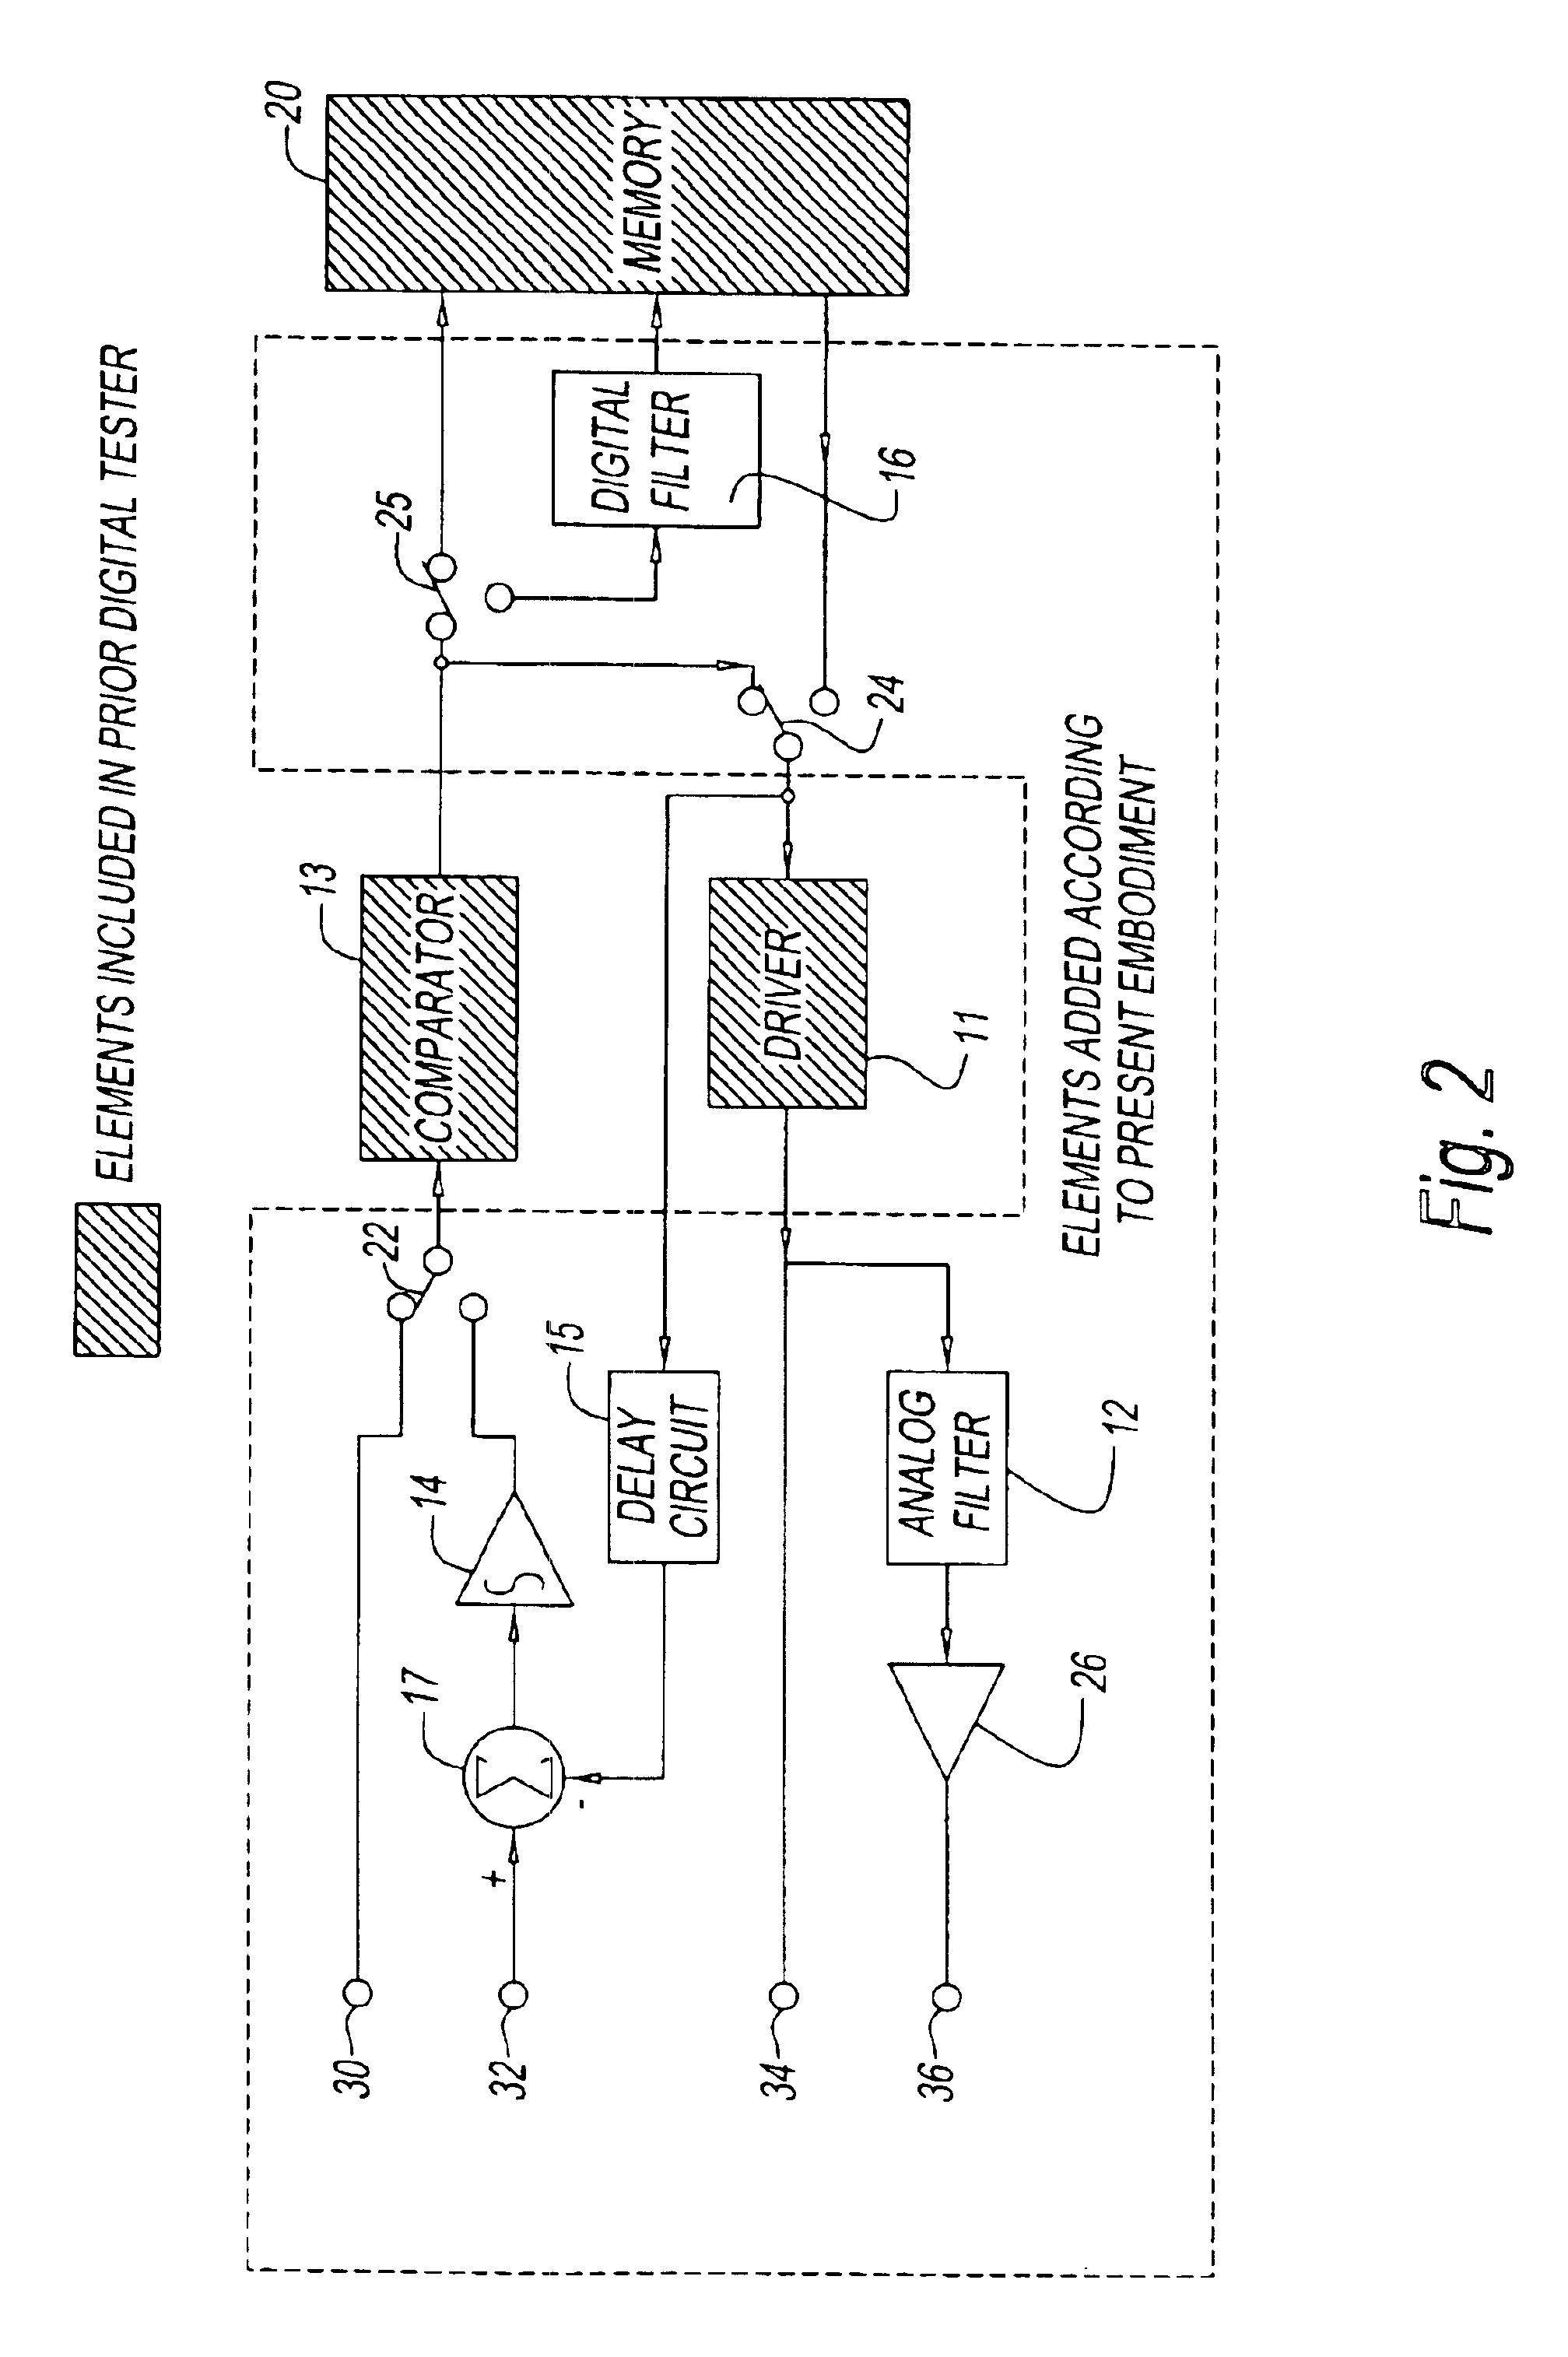 Apparatus for testing integrated circuits having an integrated unit for testing digital and analog signals